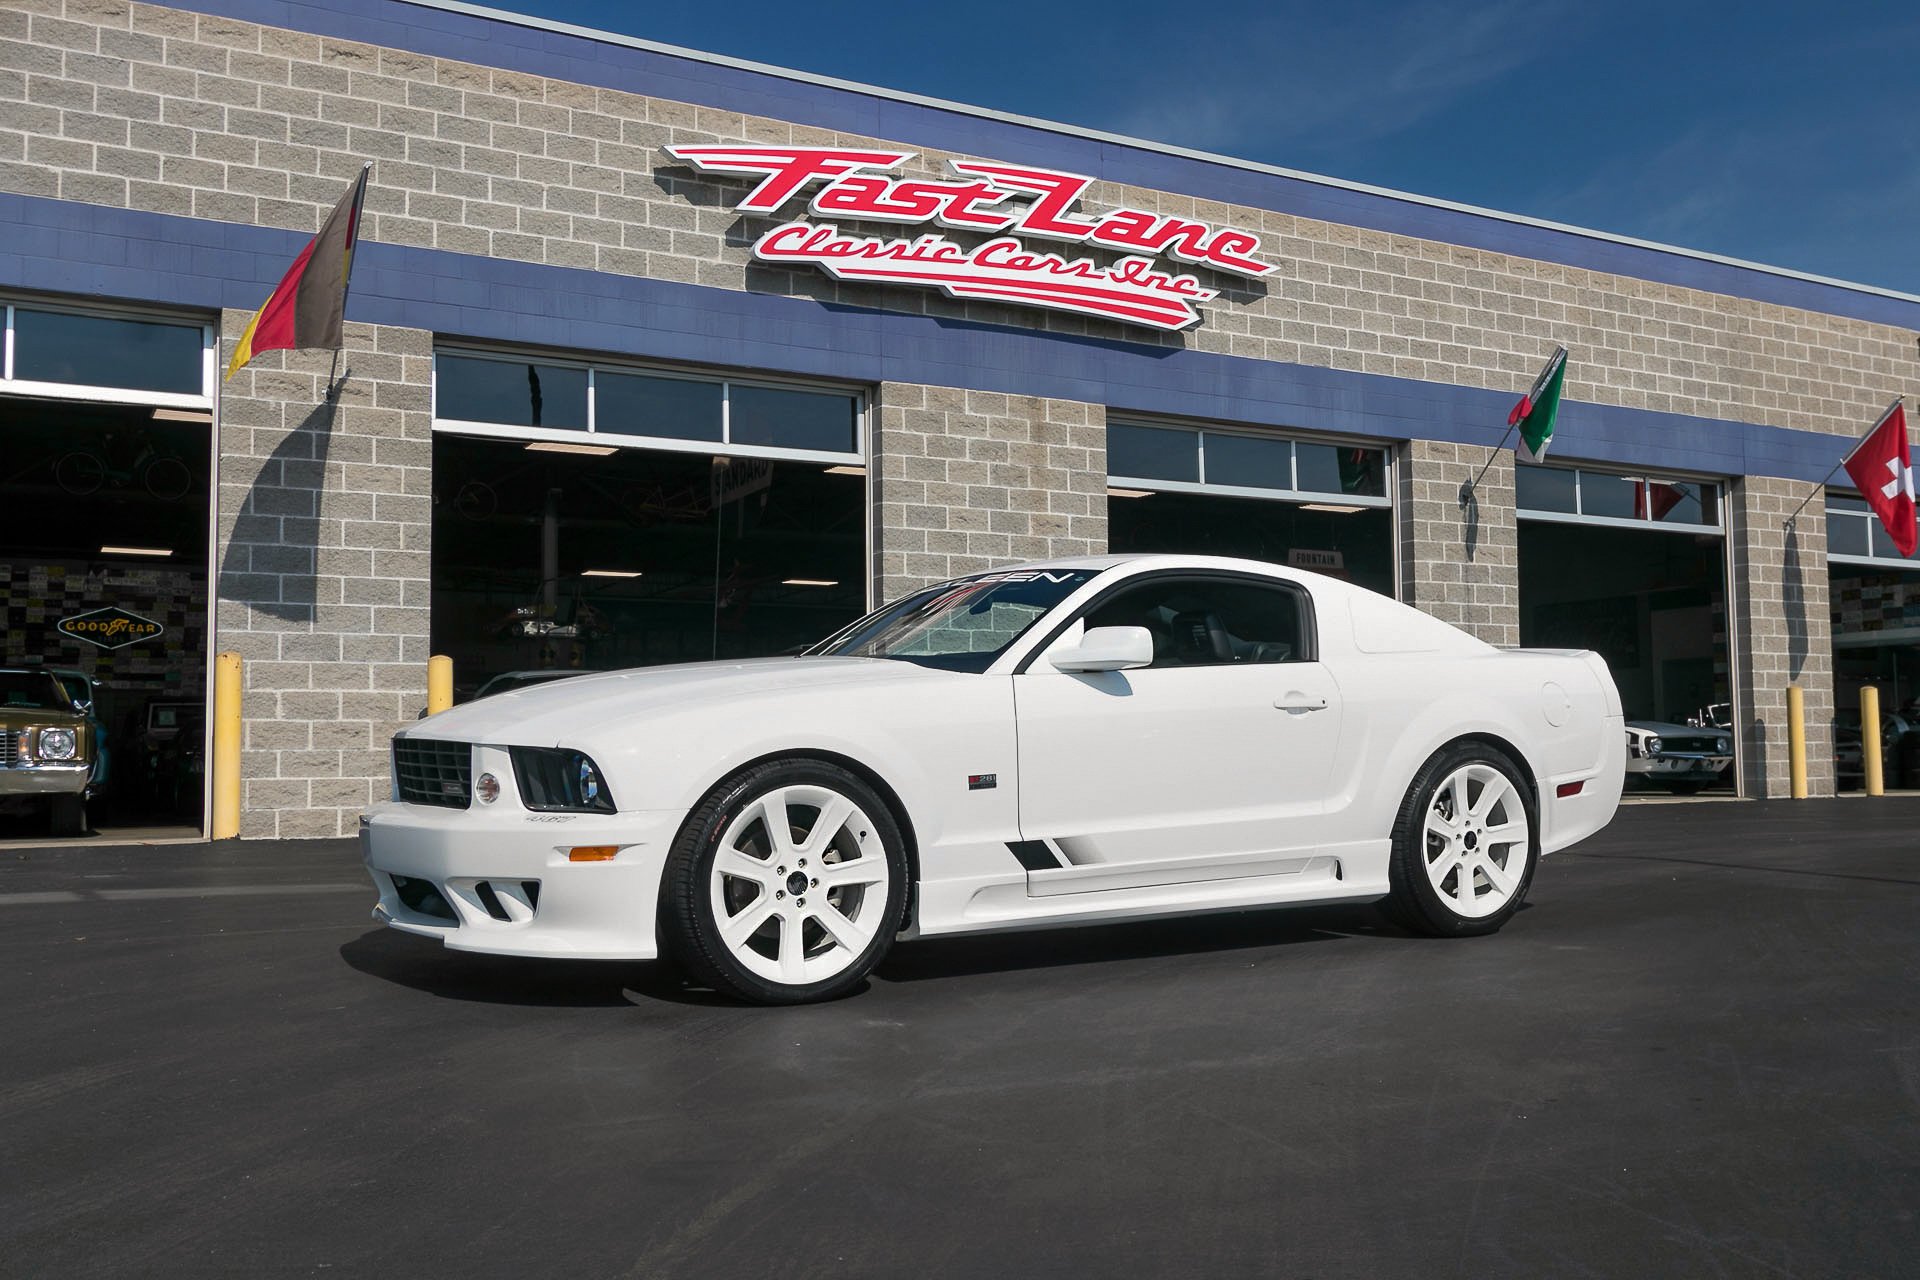 2005 Ford Mustang Saleen Fast Lane Classic Cars